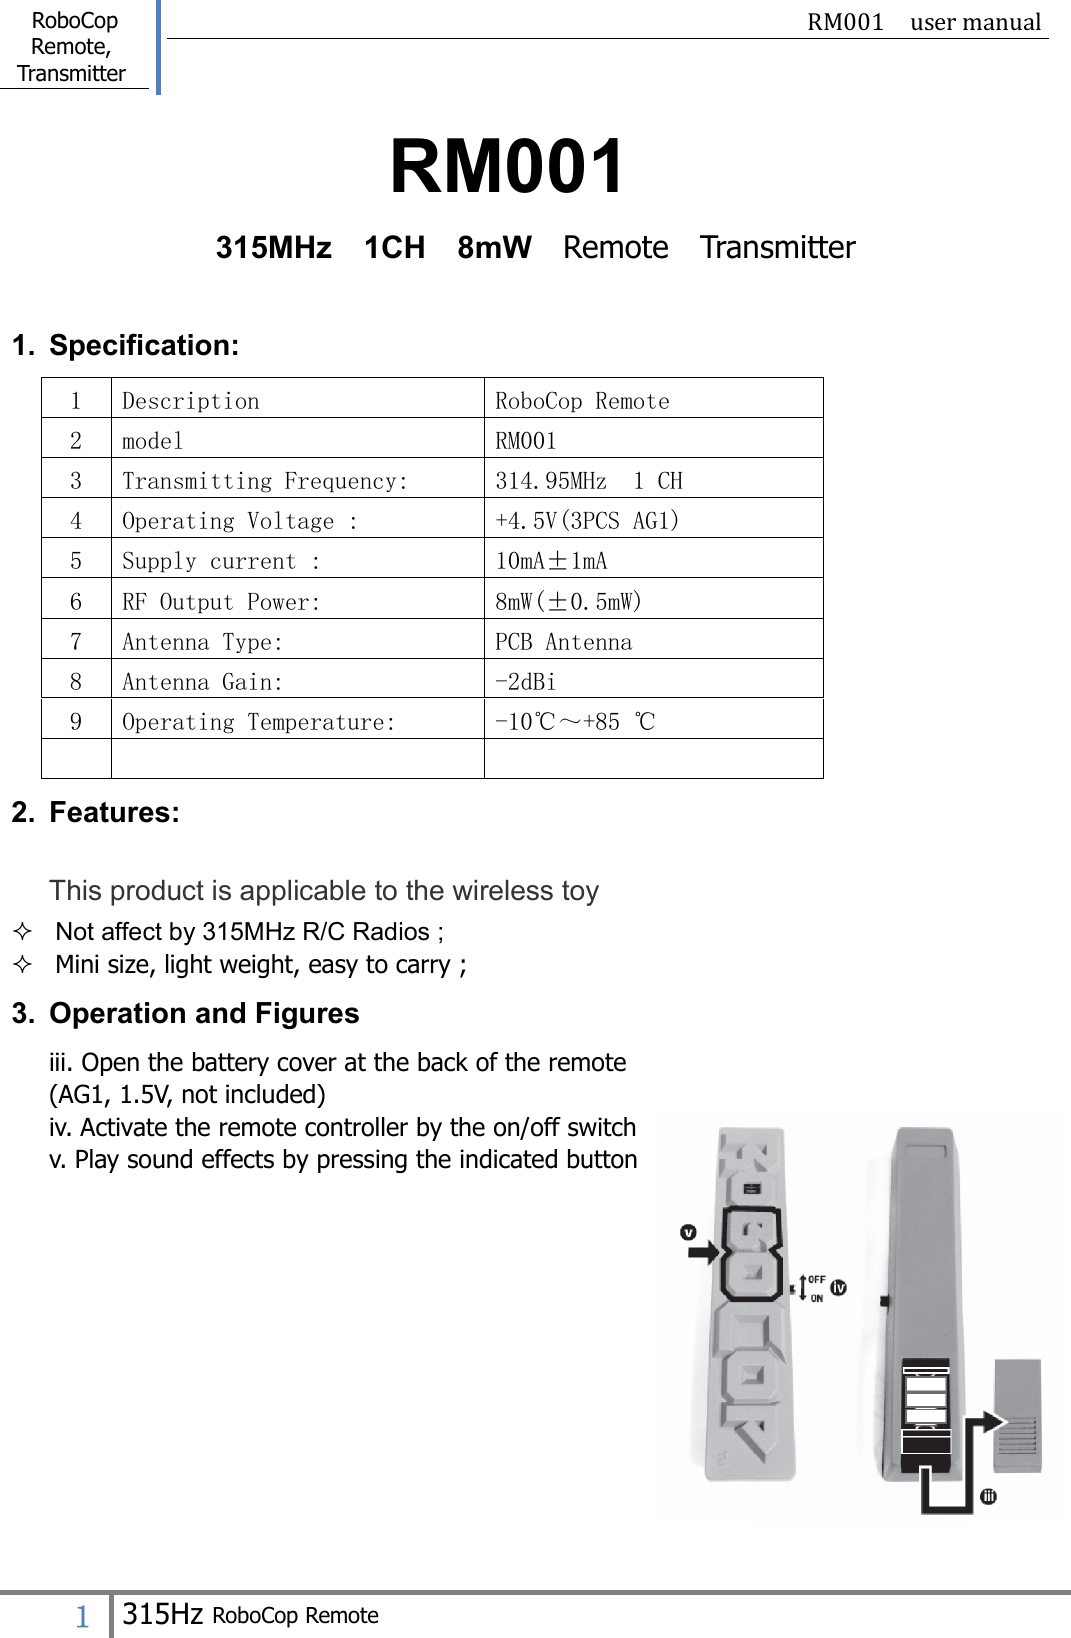  RoboCop Remote, Transmitter                                                    RM001  user manual   １ 315Hz RoboCop Remote  RM001 315MHz    1CH    8mW    Remote    Transmitter  1.  Specification: 1  Description  RoboCop Remote 2  model  RM001 3  Transmitting Frequency:  314.95MHz  1 CH 4  Operating Voltage :  +4.5V(3PCS AG1) 5  Supply current :  10mA±1mA 6  RF Output Power:  8mW(±0.5mW) 7  Antenna Type:  PCB Antenna 8  Antenna Gain:  -2dBi 9  Operating Temperature:  -10℃～+85 ℃    2.  Features: This product is applicable to the wireless toy   Not affect by 315MHz R/C Radios ;  Mini size, light weight, easy to carry ; 3.  Operation and Figures iii. Open the battery cover at the back of the remote (AG1, 1.5V, not included) iv. Activate the remote controller by the on/off switch v. Play sound effects by pressing the indicated button                                                   